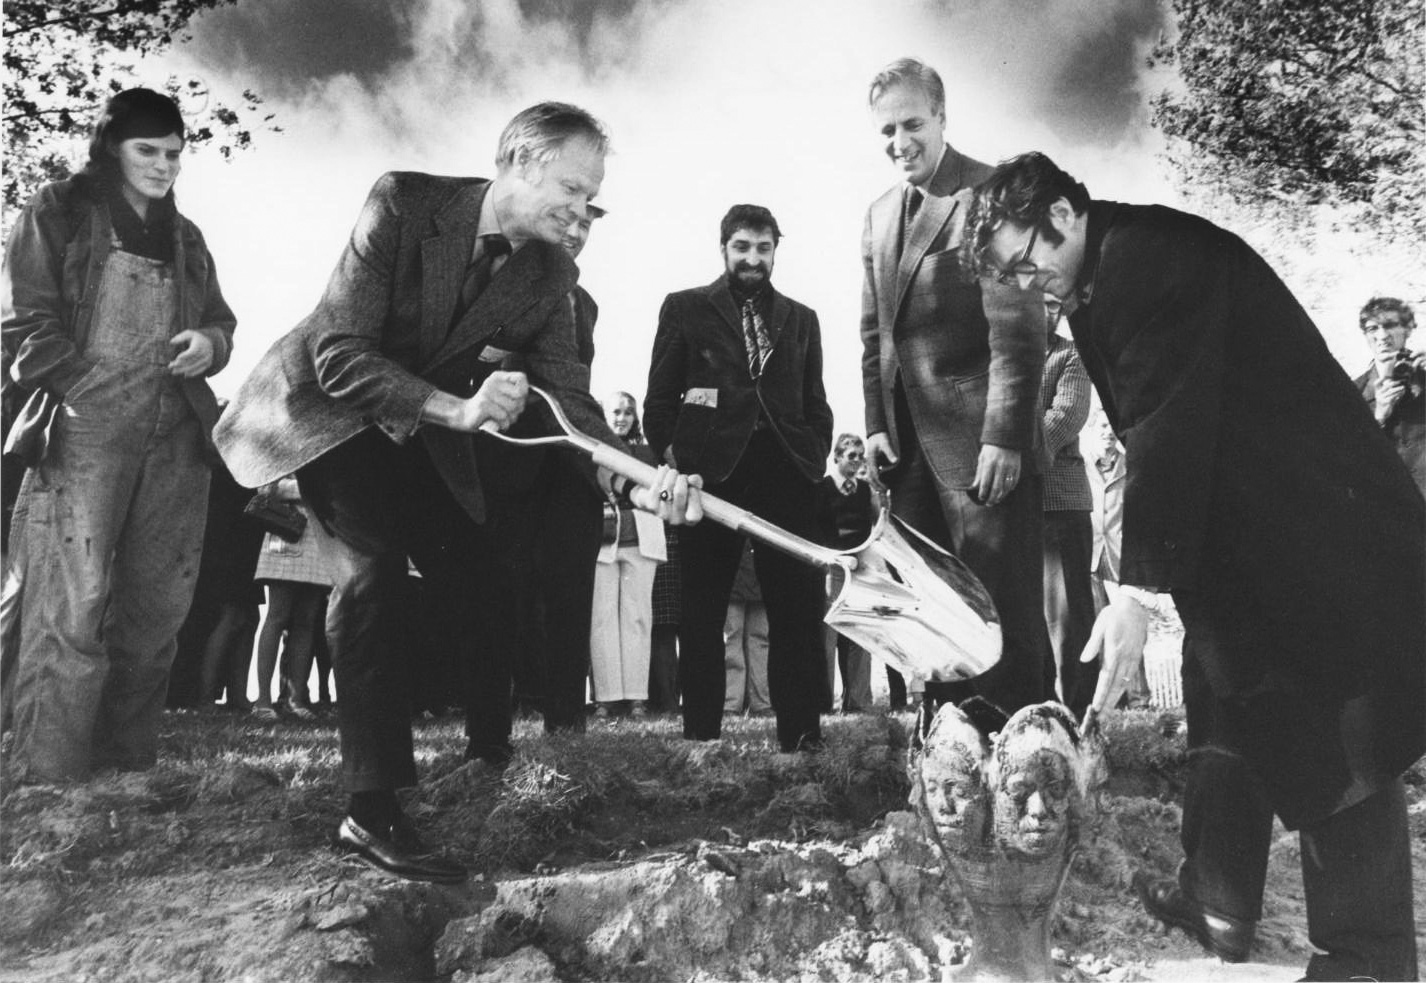 Ground breaking for the Creative Communication complex, October 1971: (L-R) Don Tilleman, Coryl Crandall, John Beaton and Conny Nelson